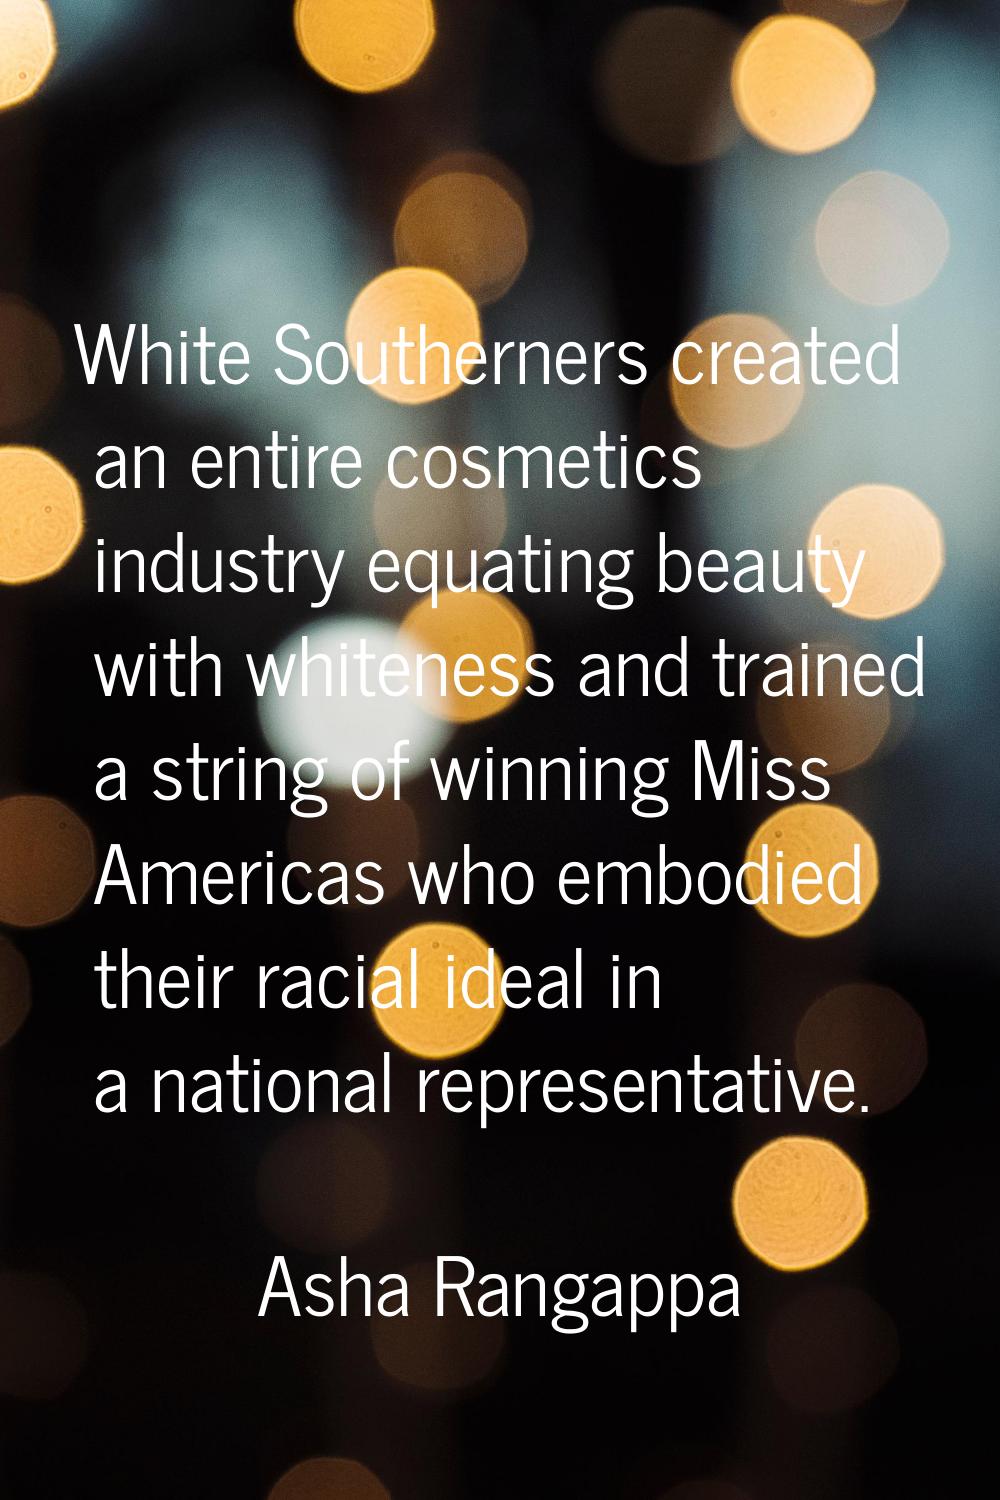 White Southerners created an entire cosmetics industry equating beauty with whiteness and trained a